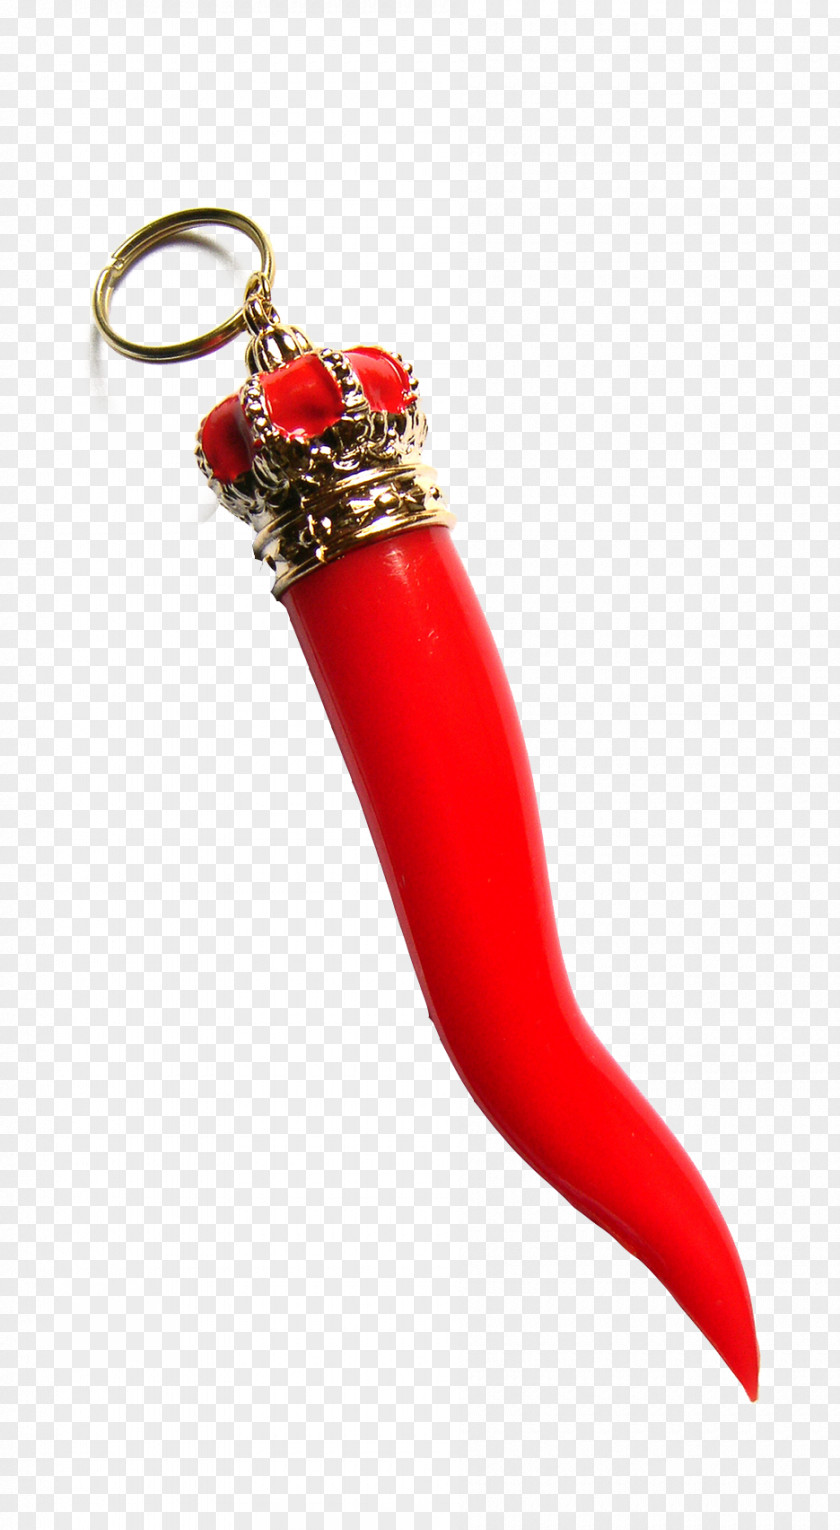 Red Amulet Chili Con Carne Pepper Cornicello Bell Capsicum PNG